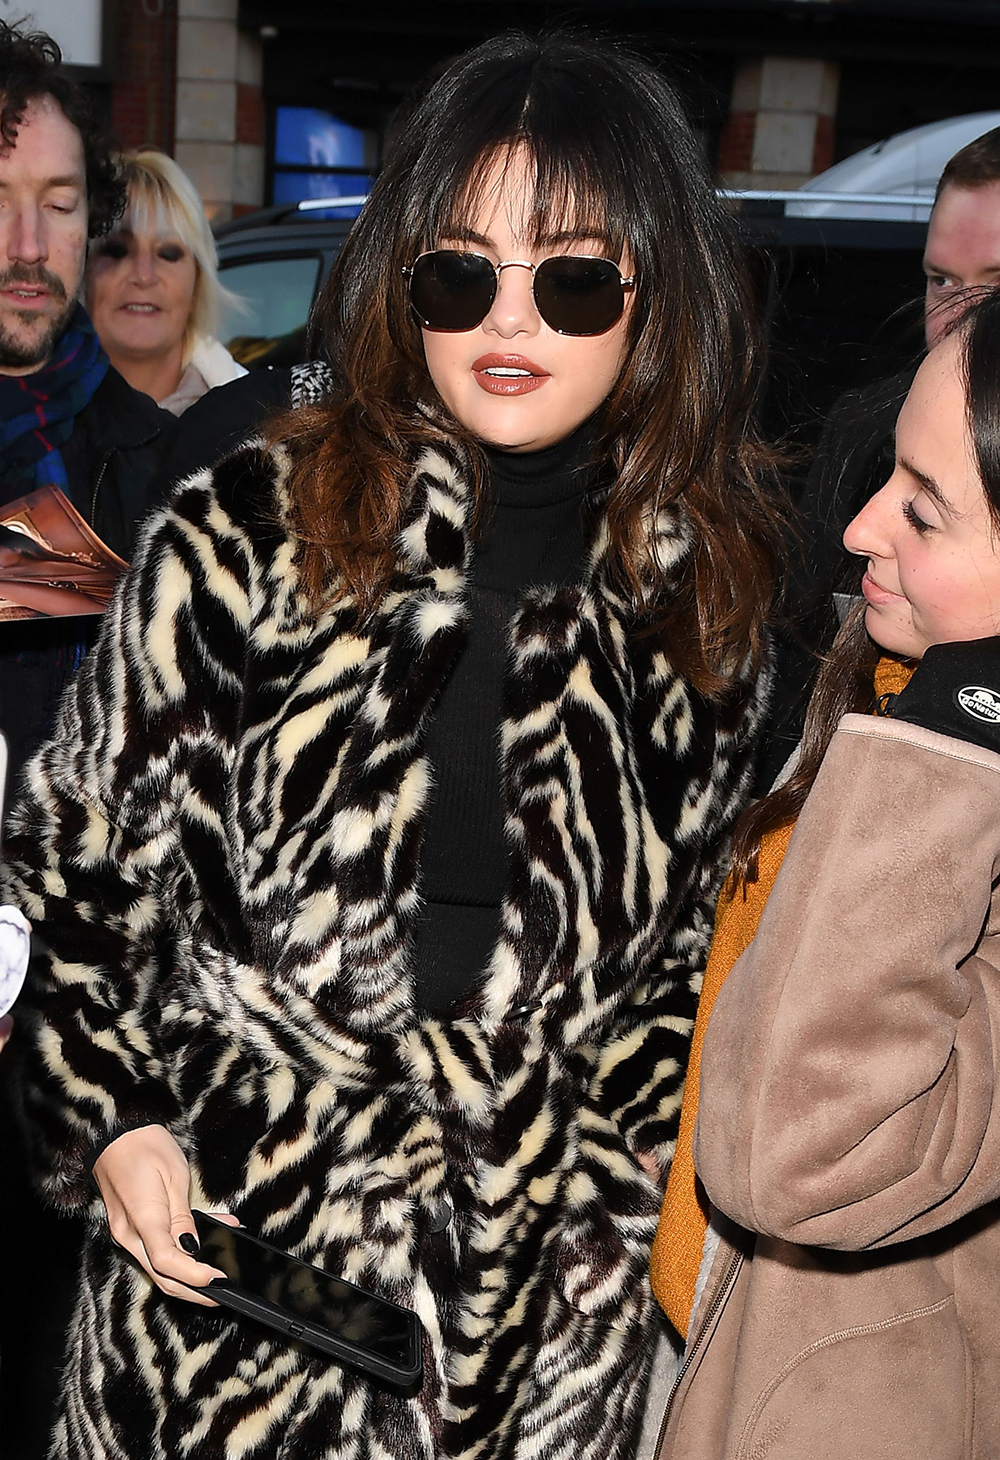 Selena Gomez arriving for the Louis Vuitton Fall-Winter 2015/2016